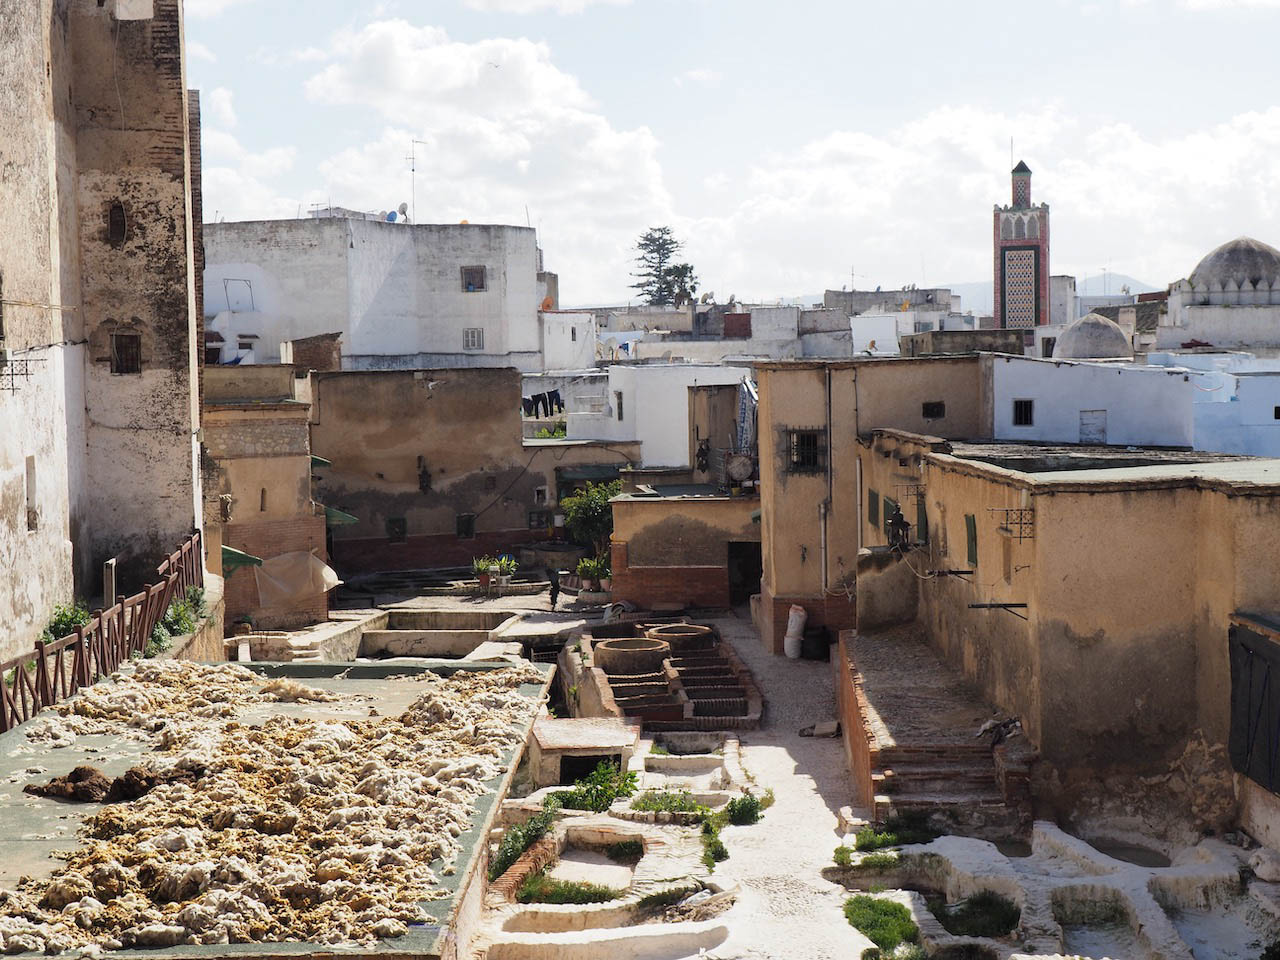 <p>View across the tannery, wool on the roof and tannery pits below, a minaret in the background</p>